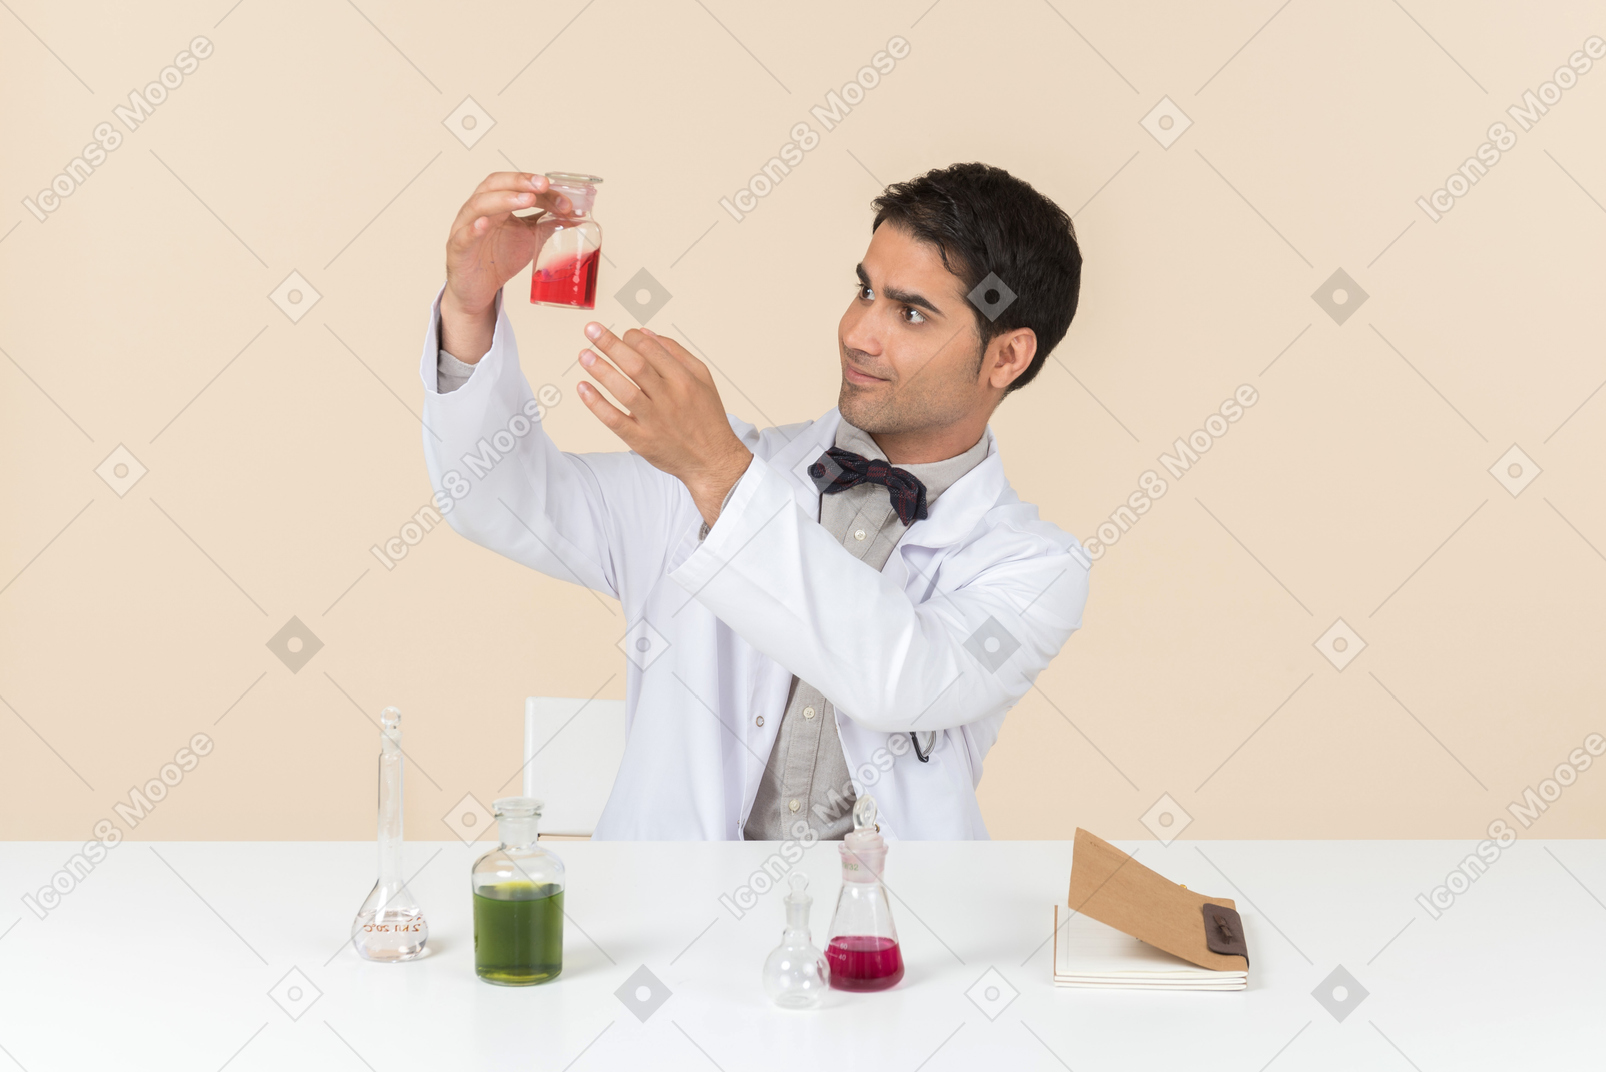 Male scientist sitting at the table and looking at the table